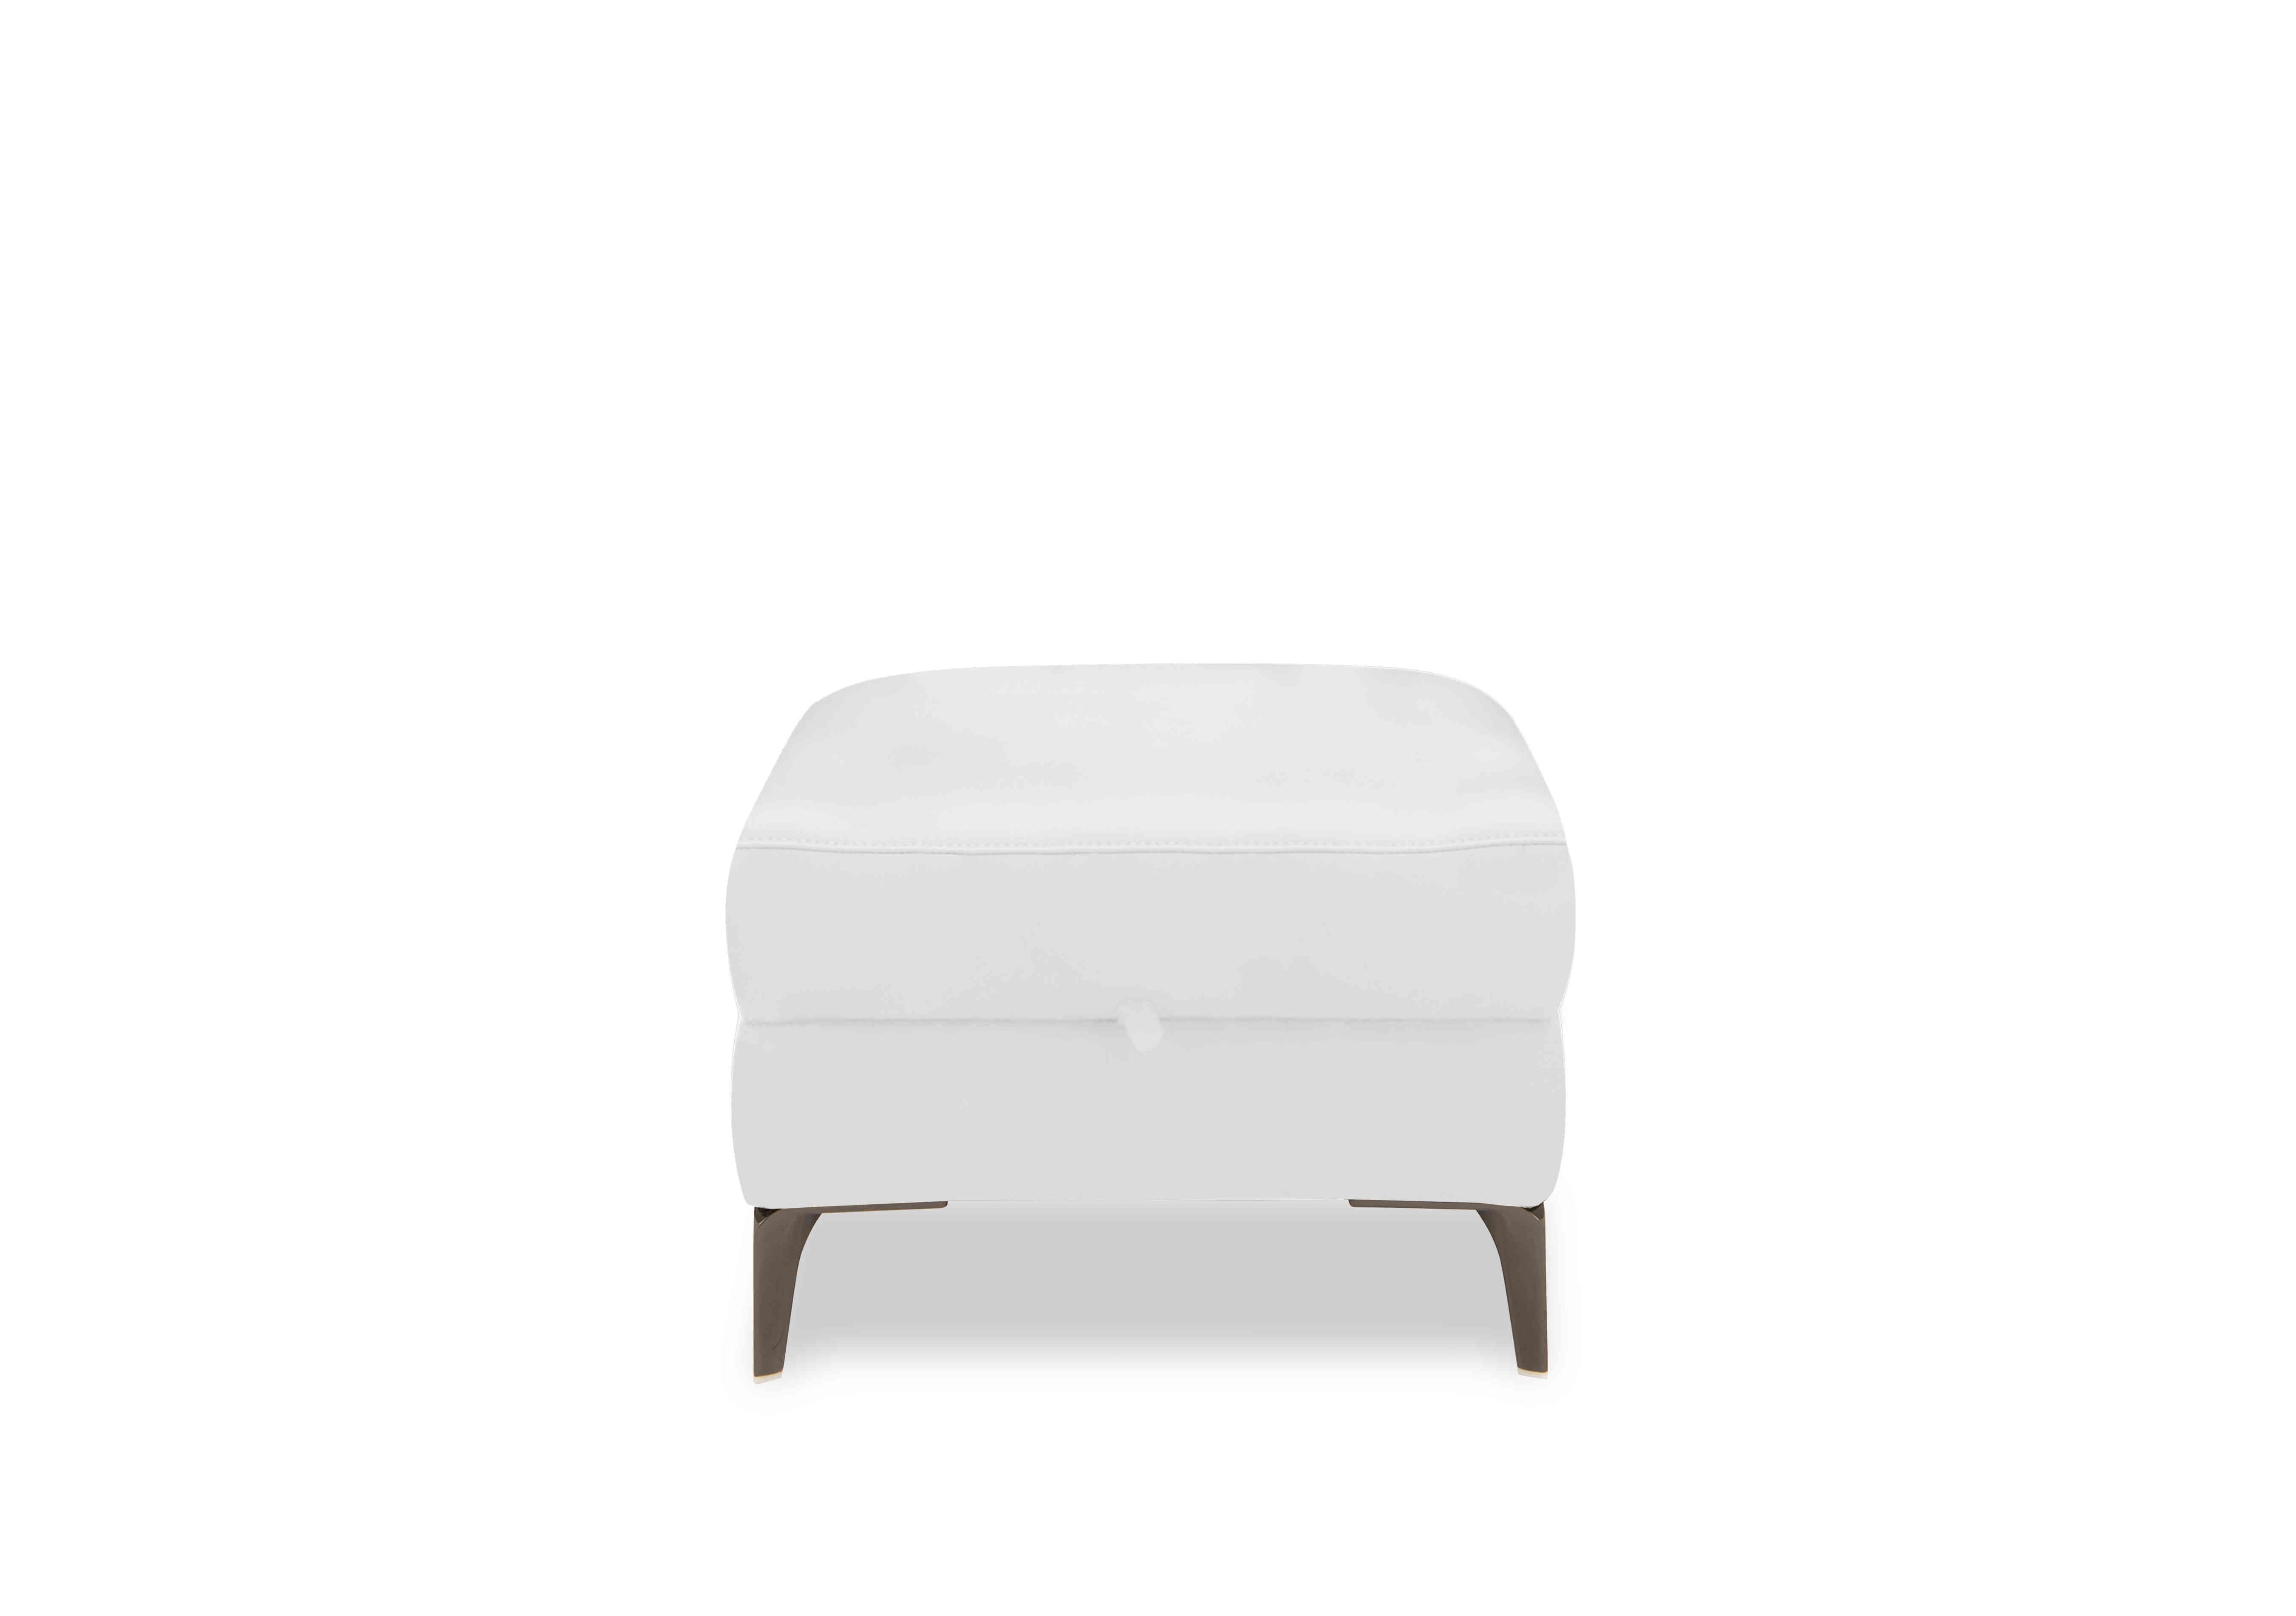 New York Leather Storage Footstool in Bv-744d Star White on Furniture Village